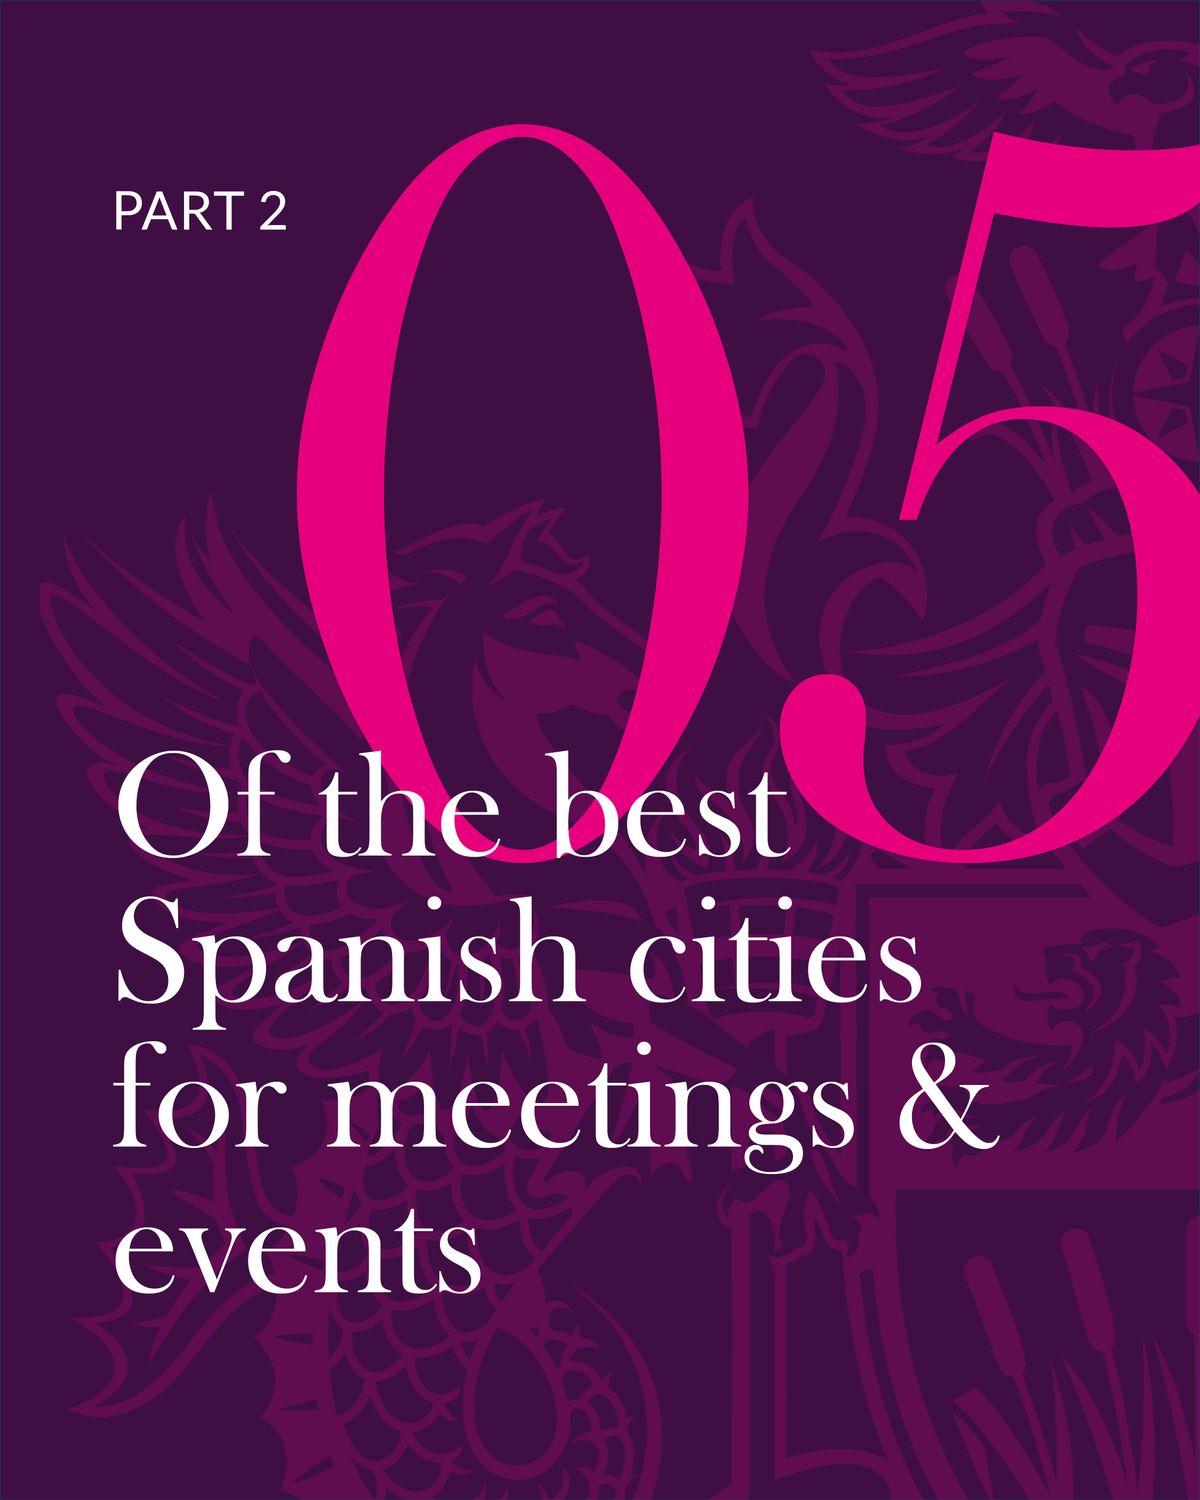 Part 2: 5 Cities in Spain to Wow your Meetings & Events Delegates